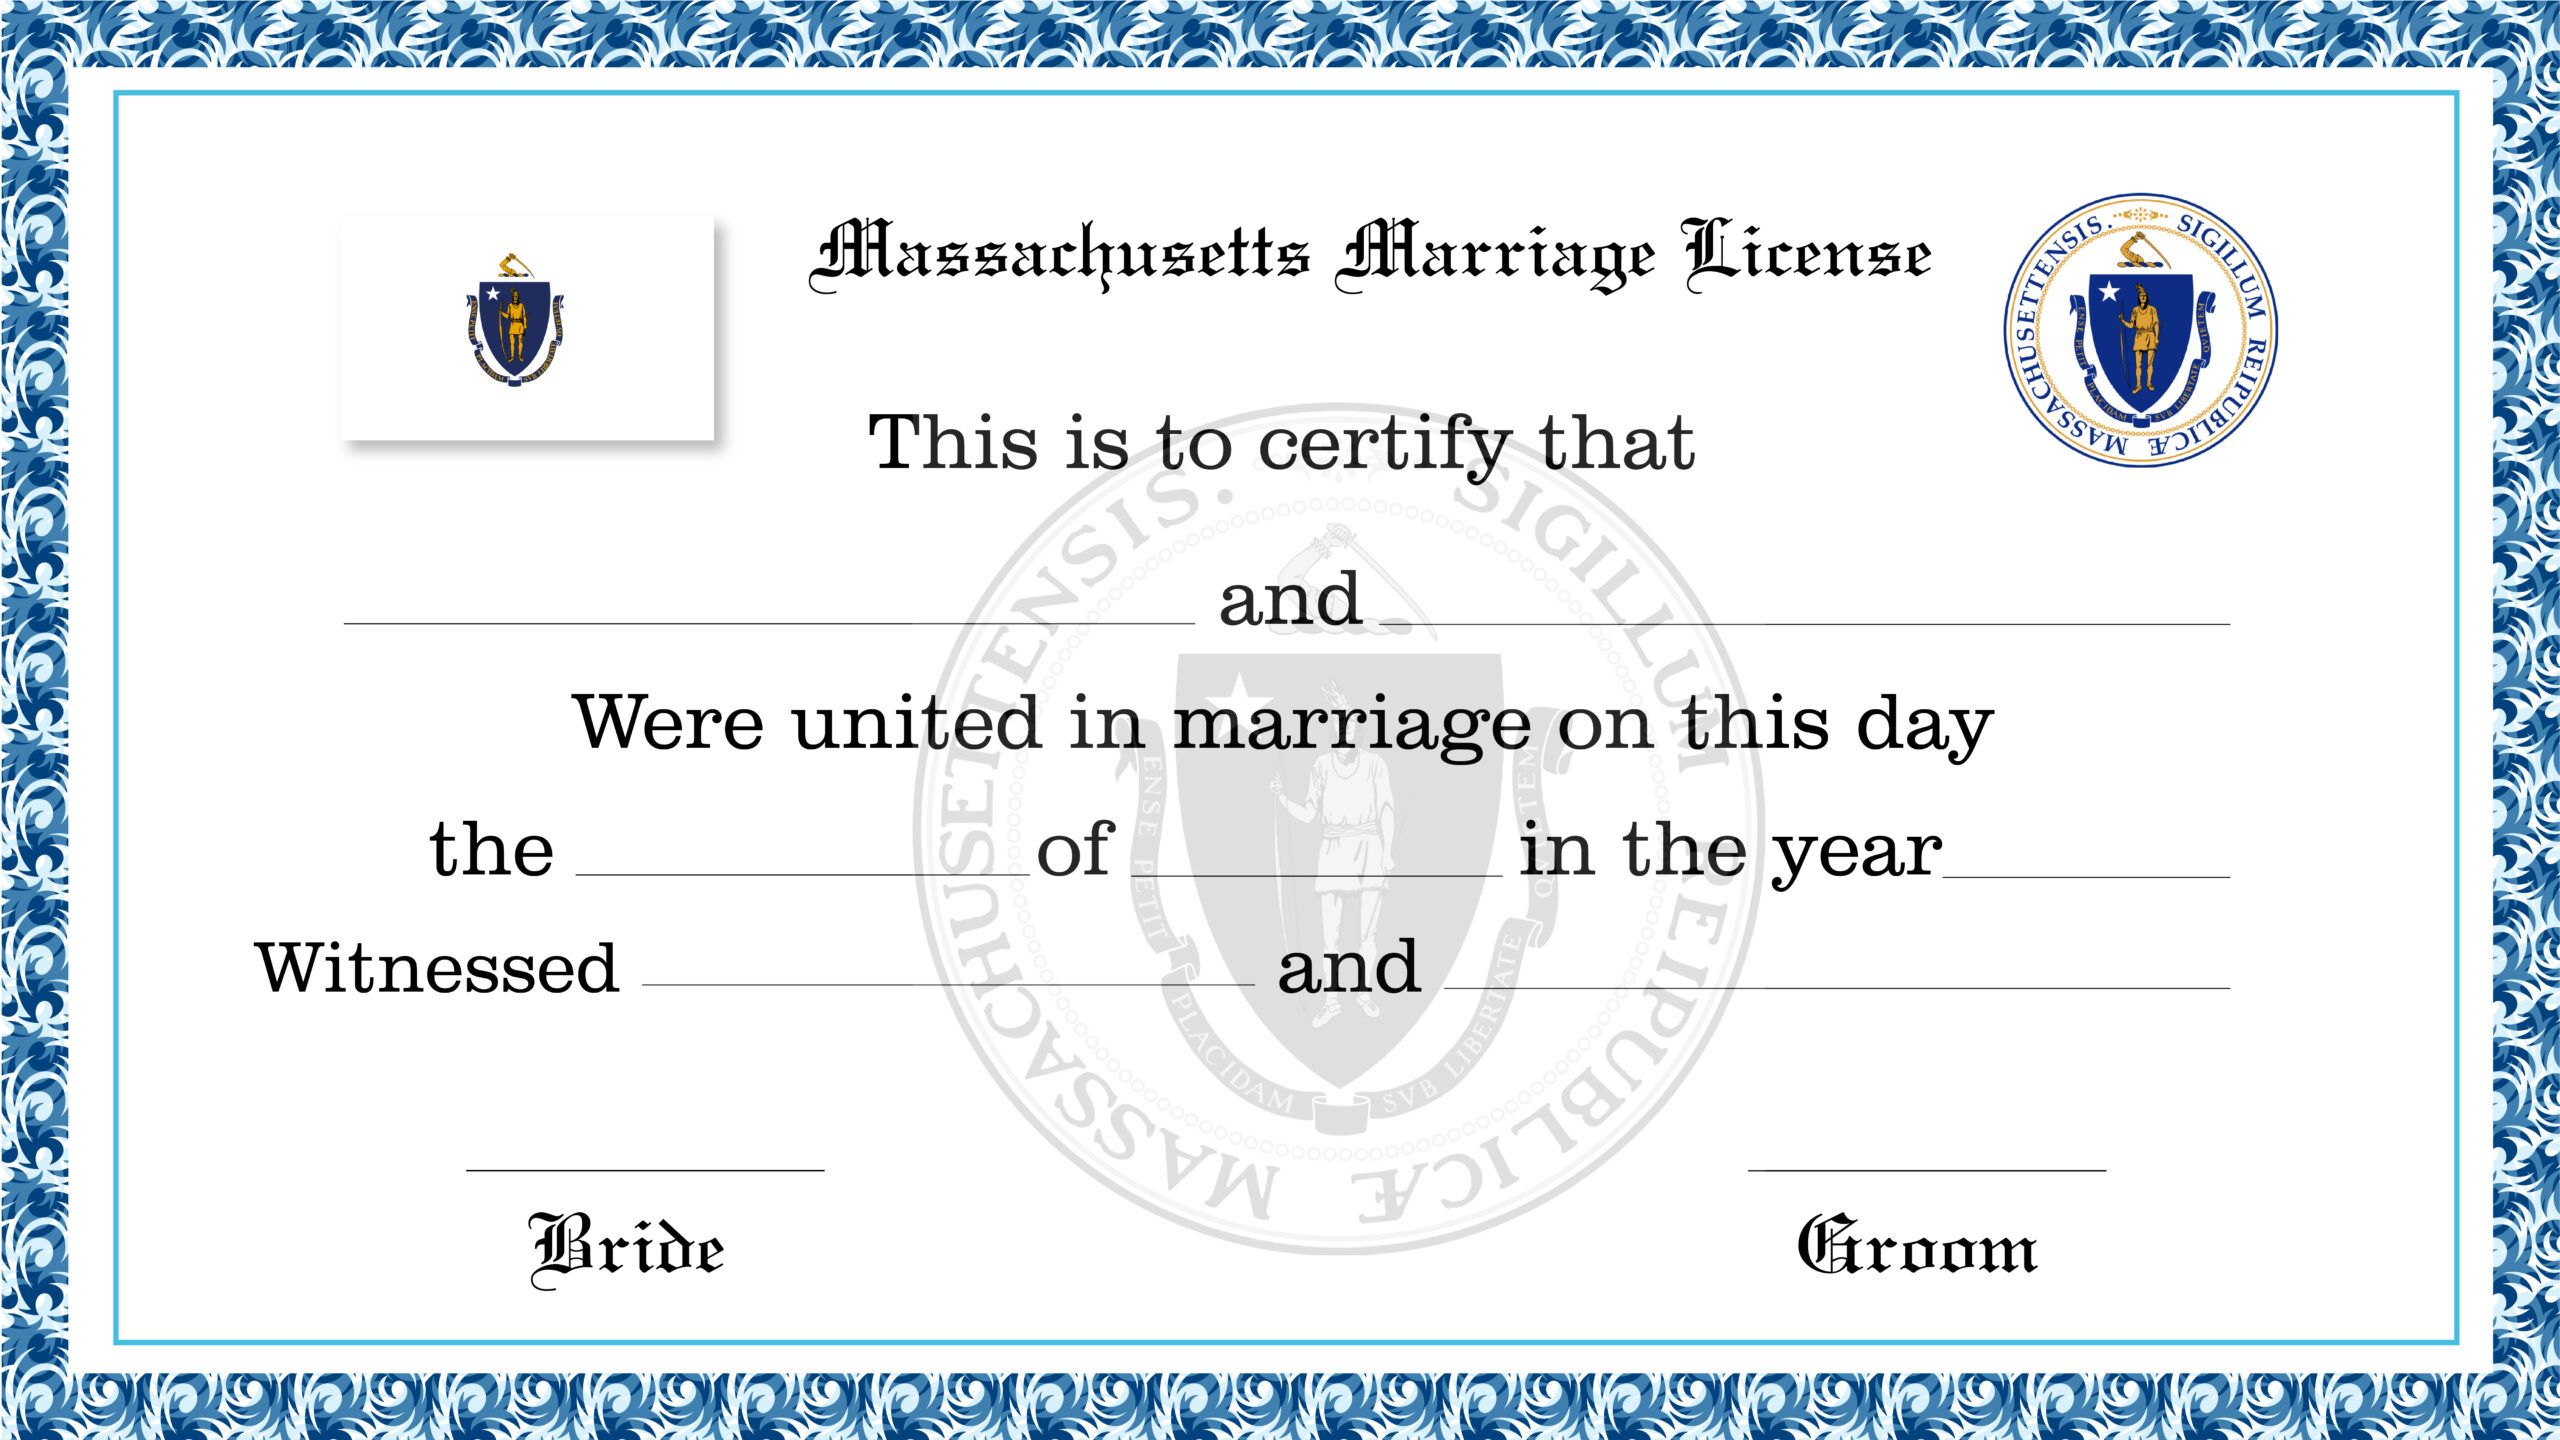 Massachusetts Marriage License License Lookup